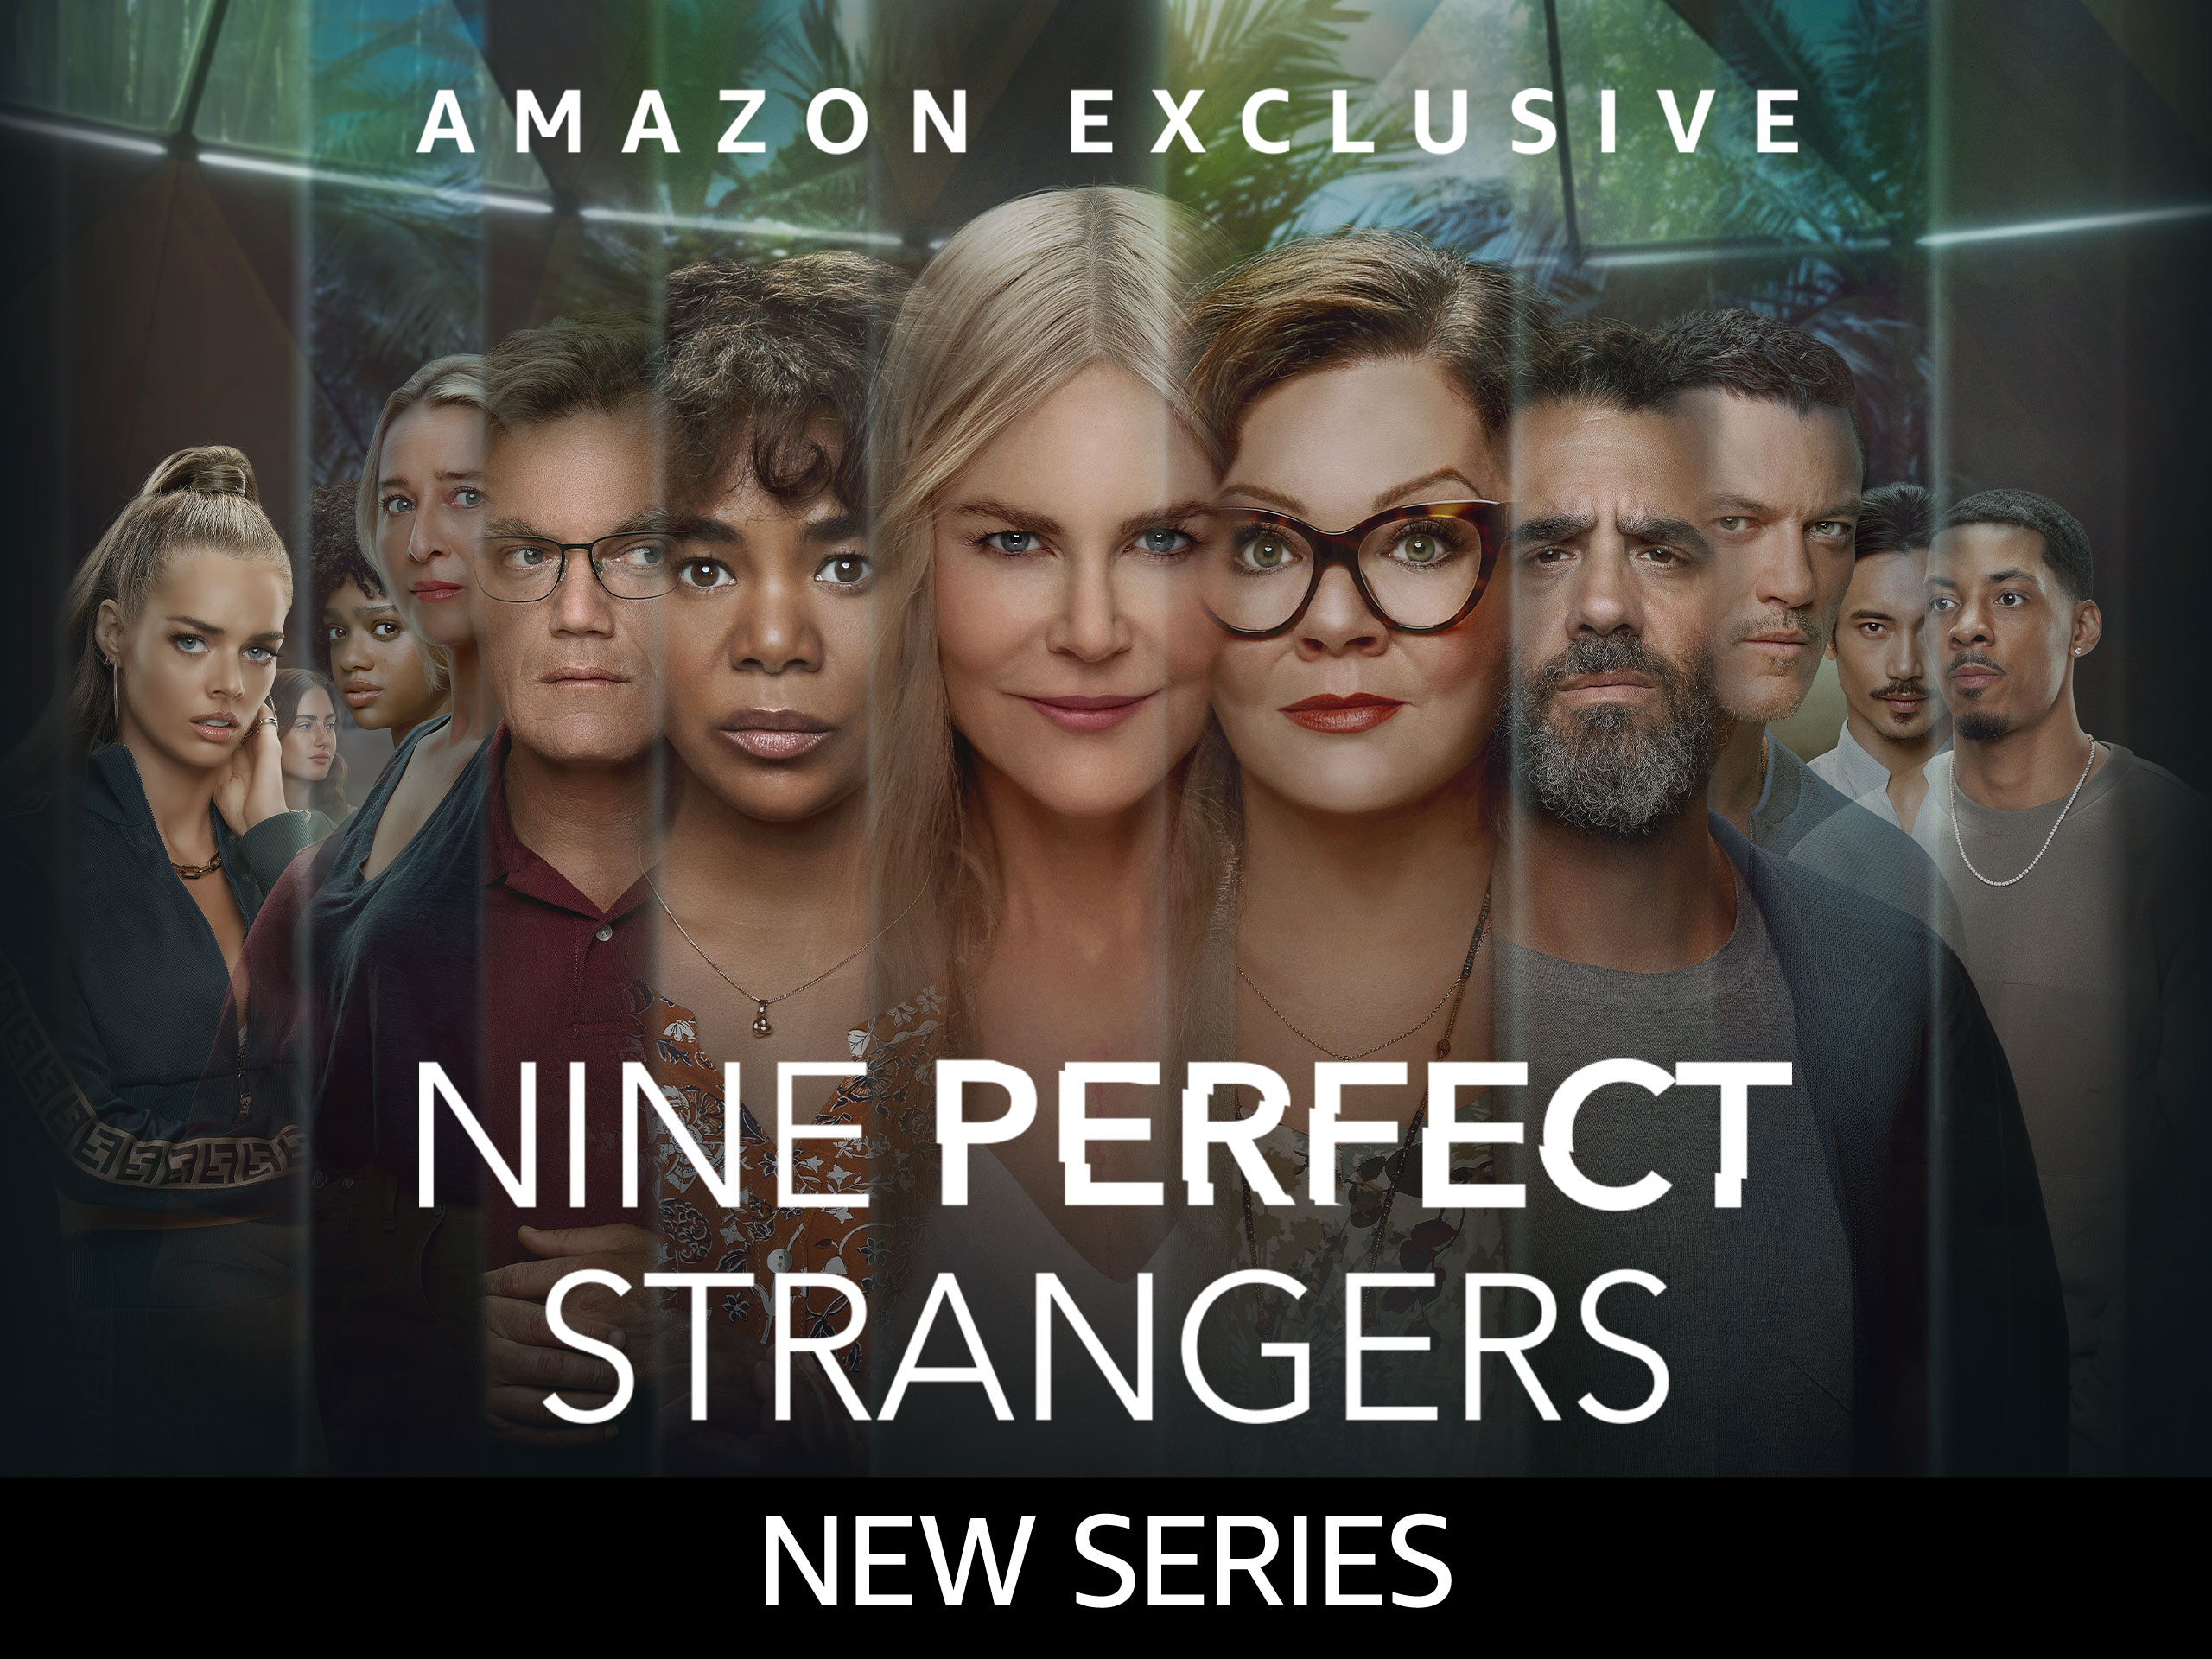 Nine Perfect Strangers Season 2 : More On the Release Date, Cast And Plot